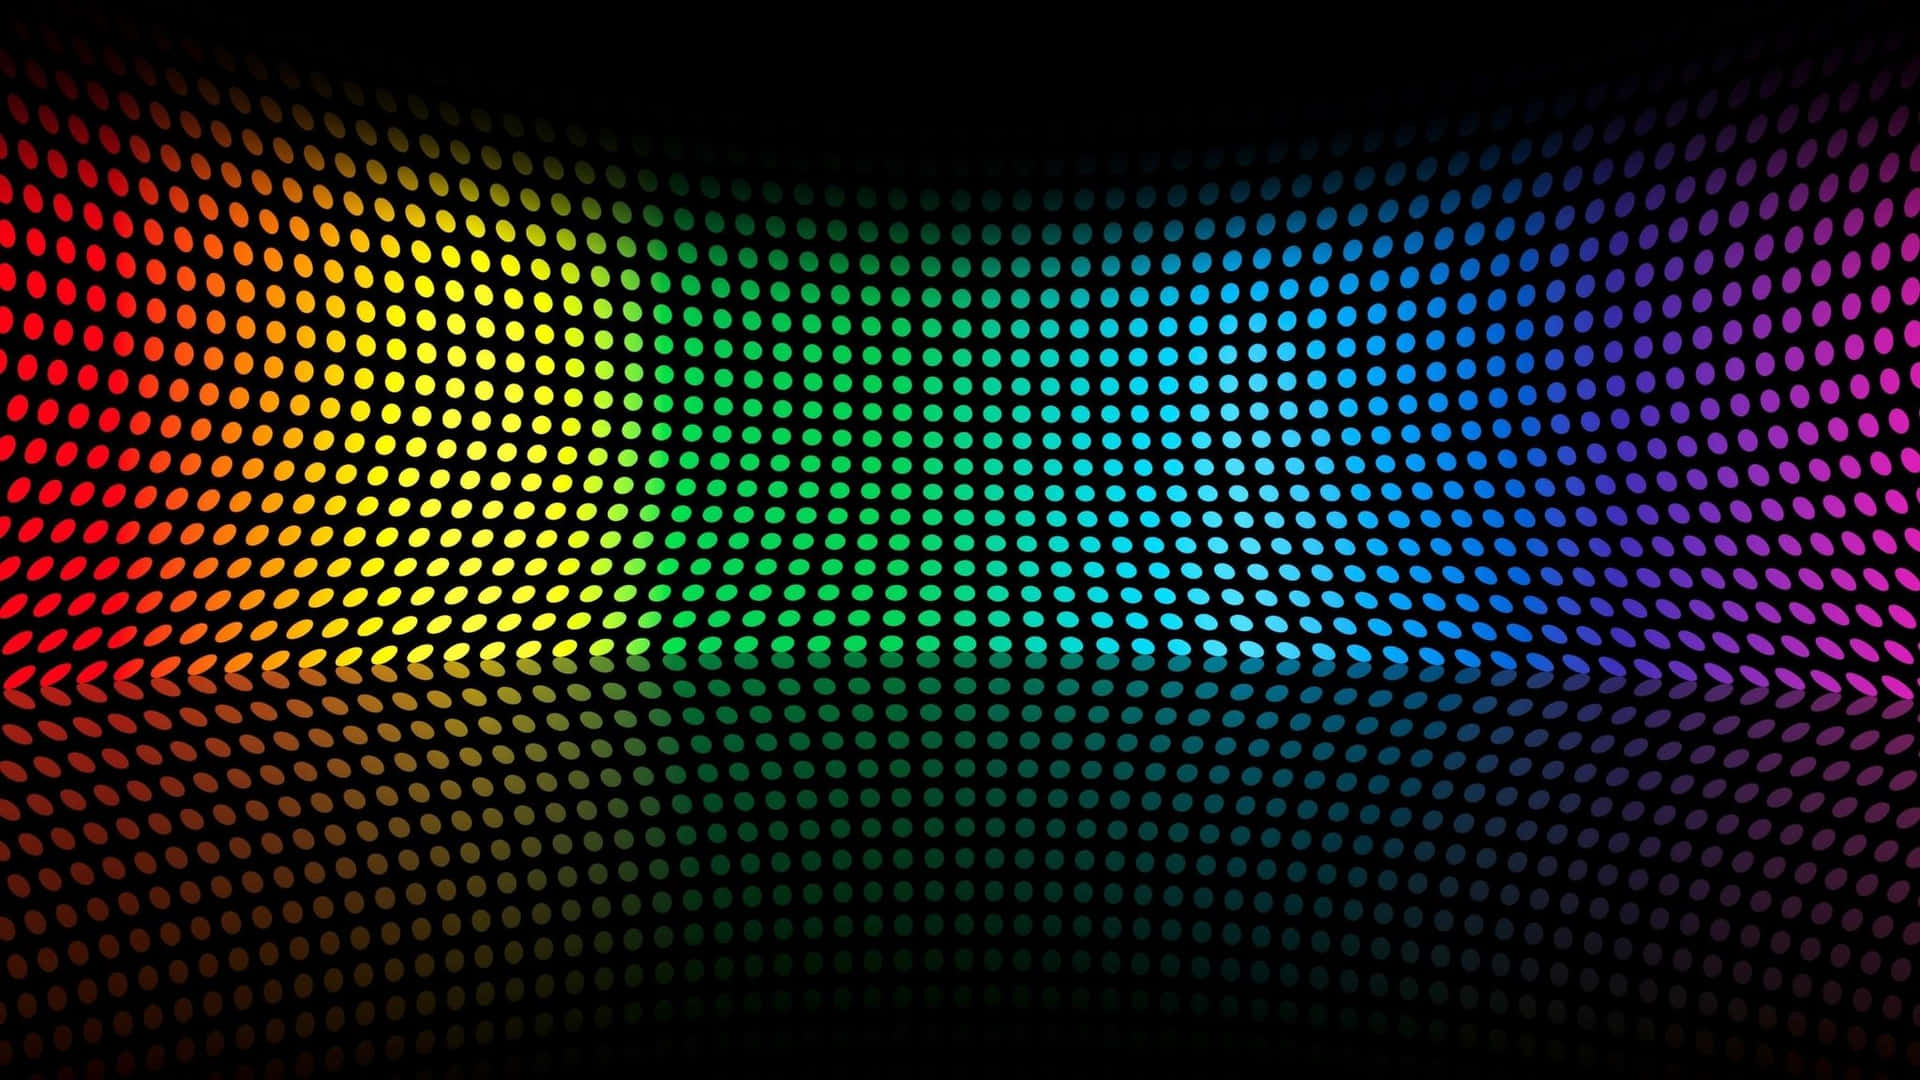 Rainbow Dotted 2048x1152 Pixel Background